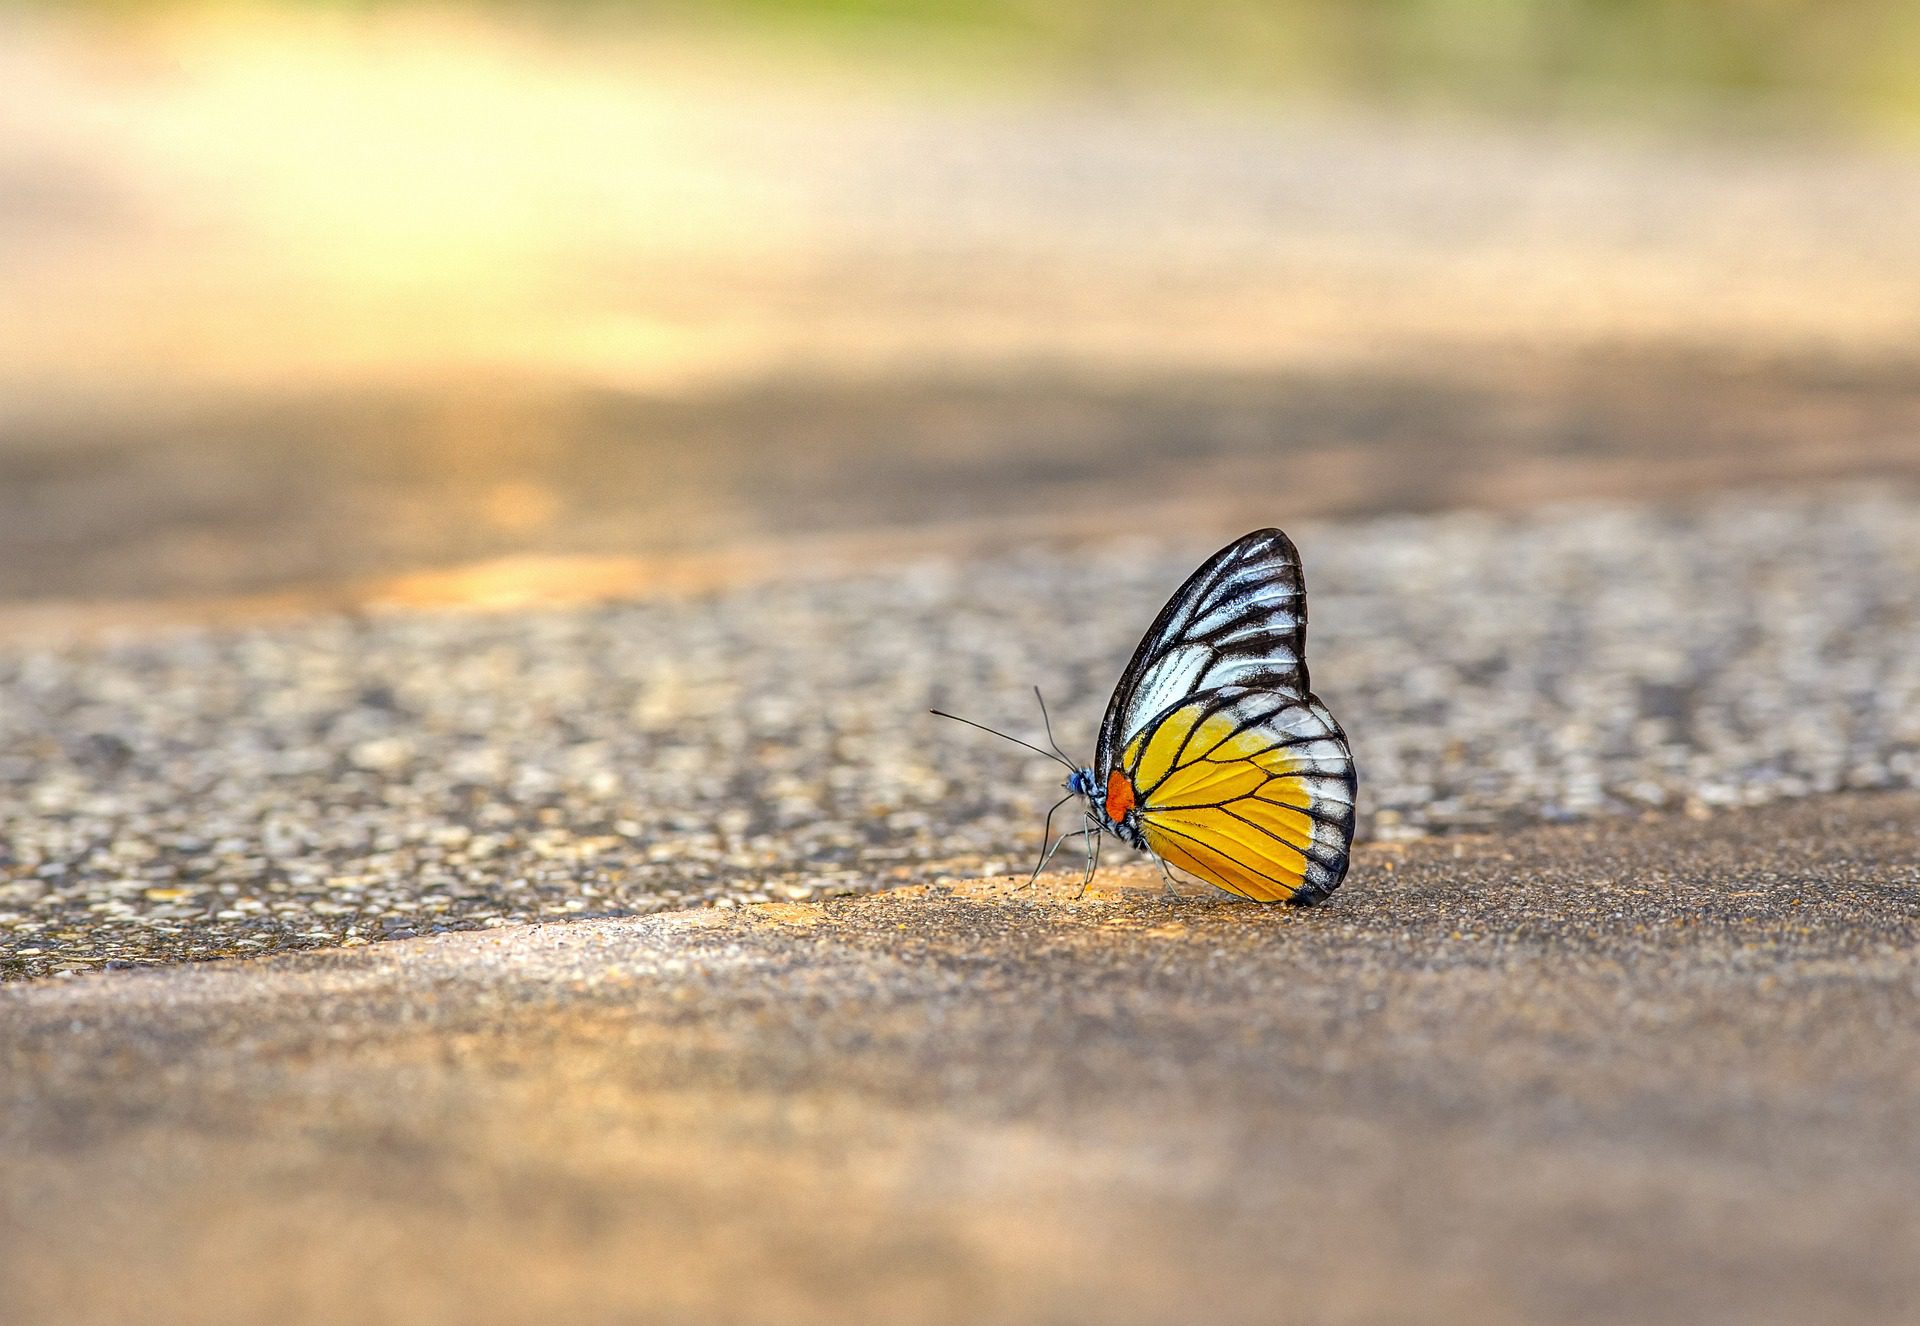 30 Fascinating Facts about Butterflies - Discover Walks Blog